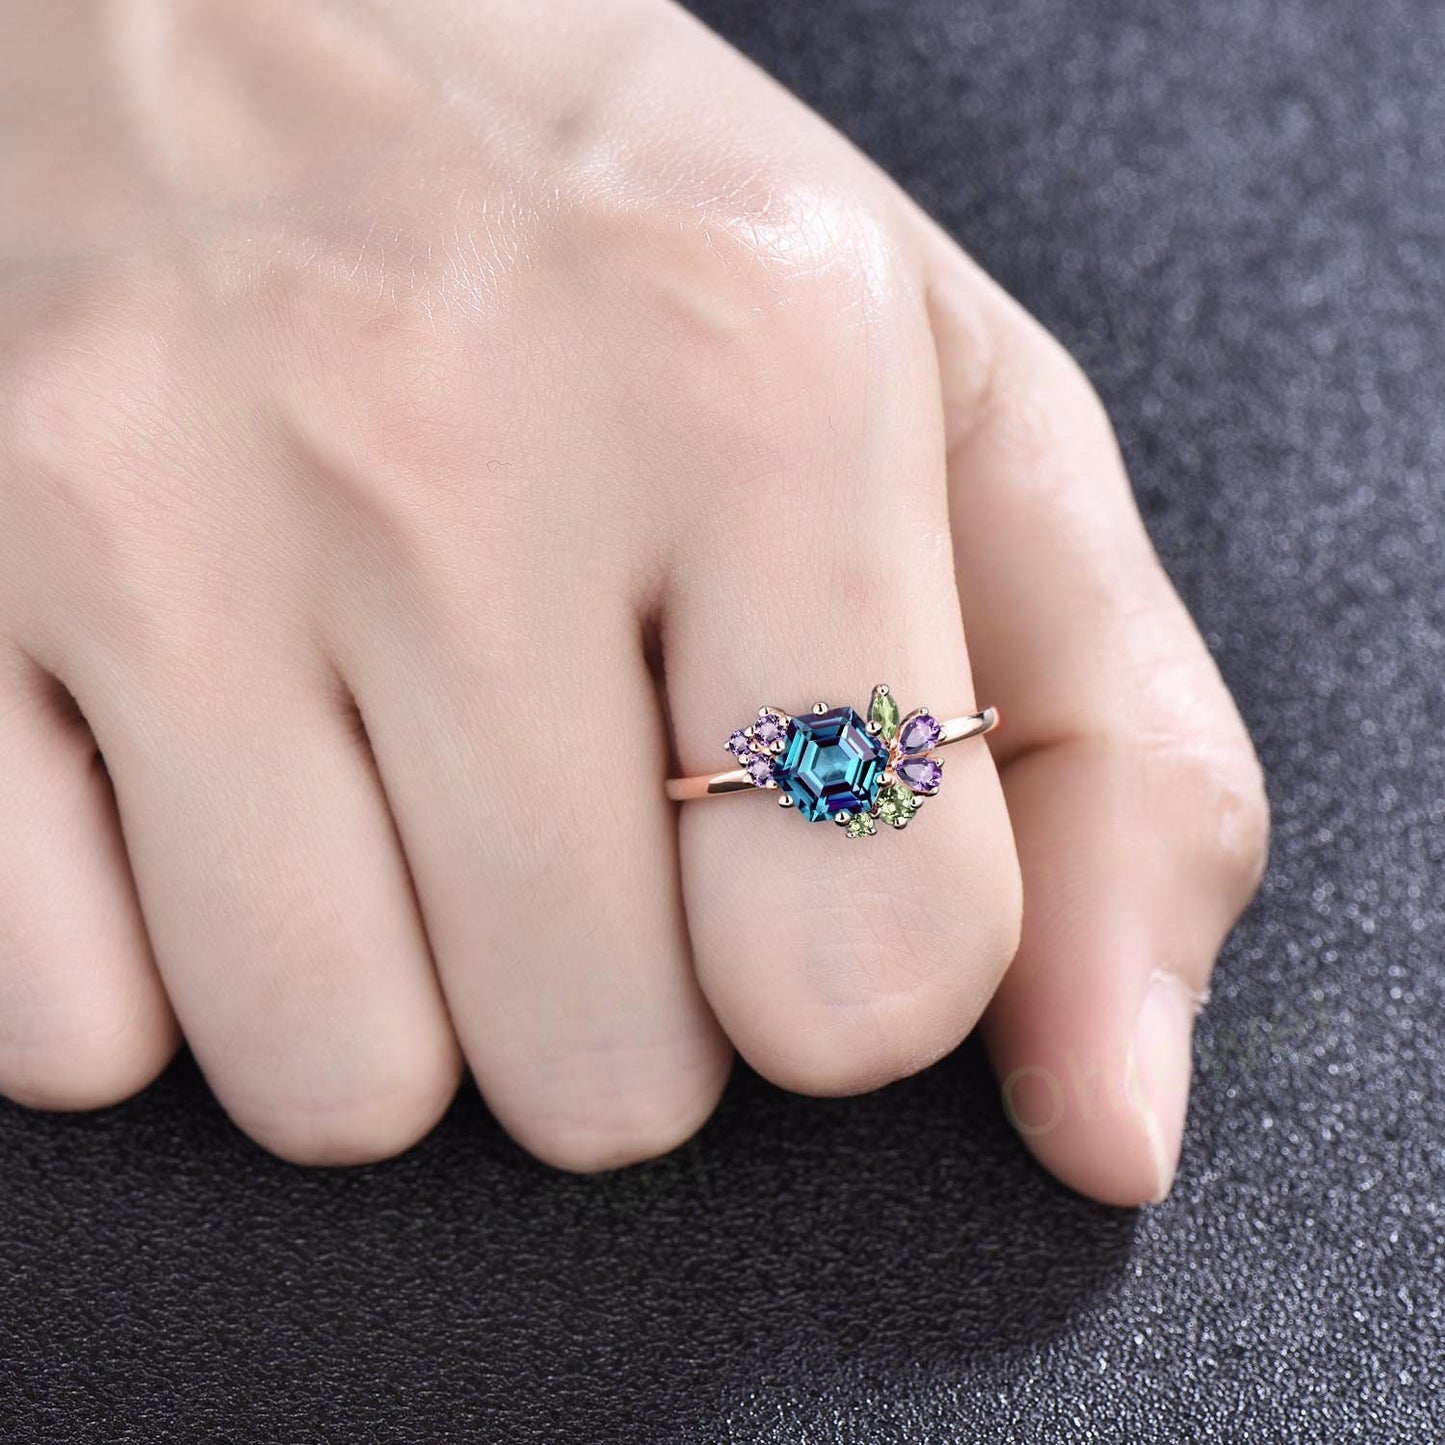 Vintage Hexagon cut alexandrite engagement ring cluster amethyst peridot ring solid 14k white gold women unique dainty anniversary ring gift